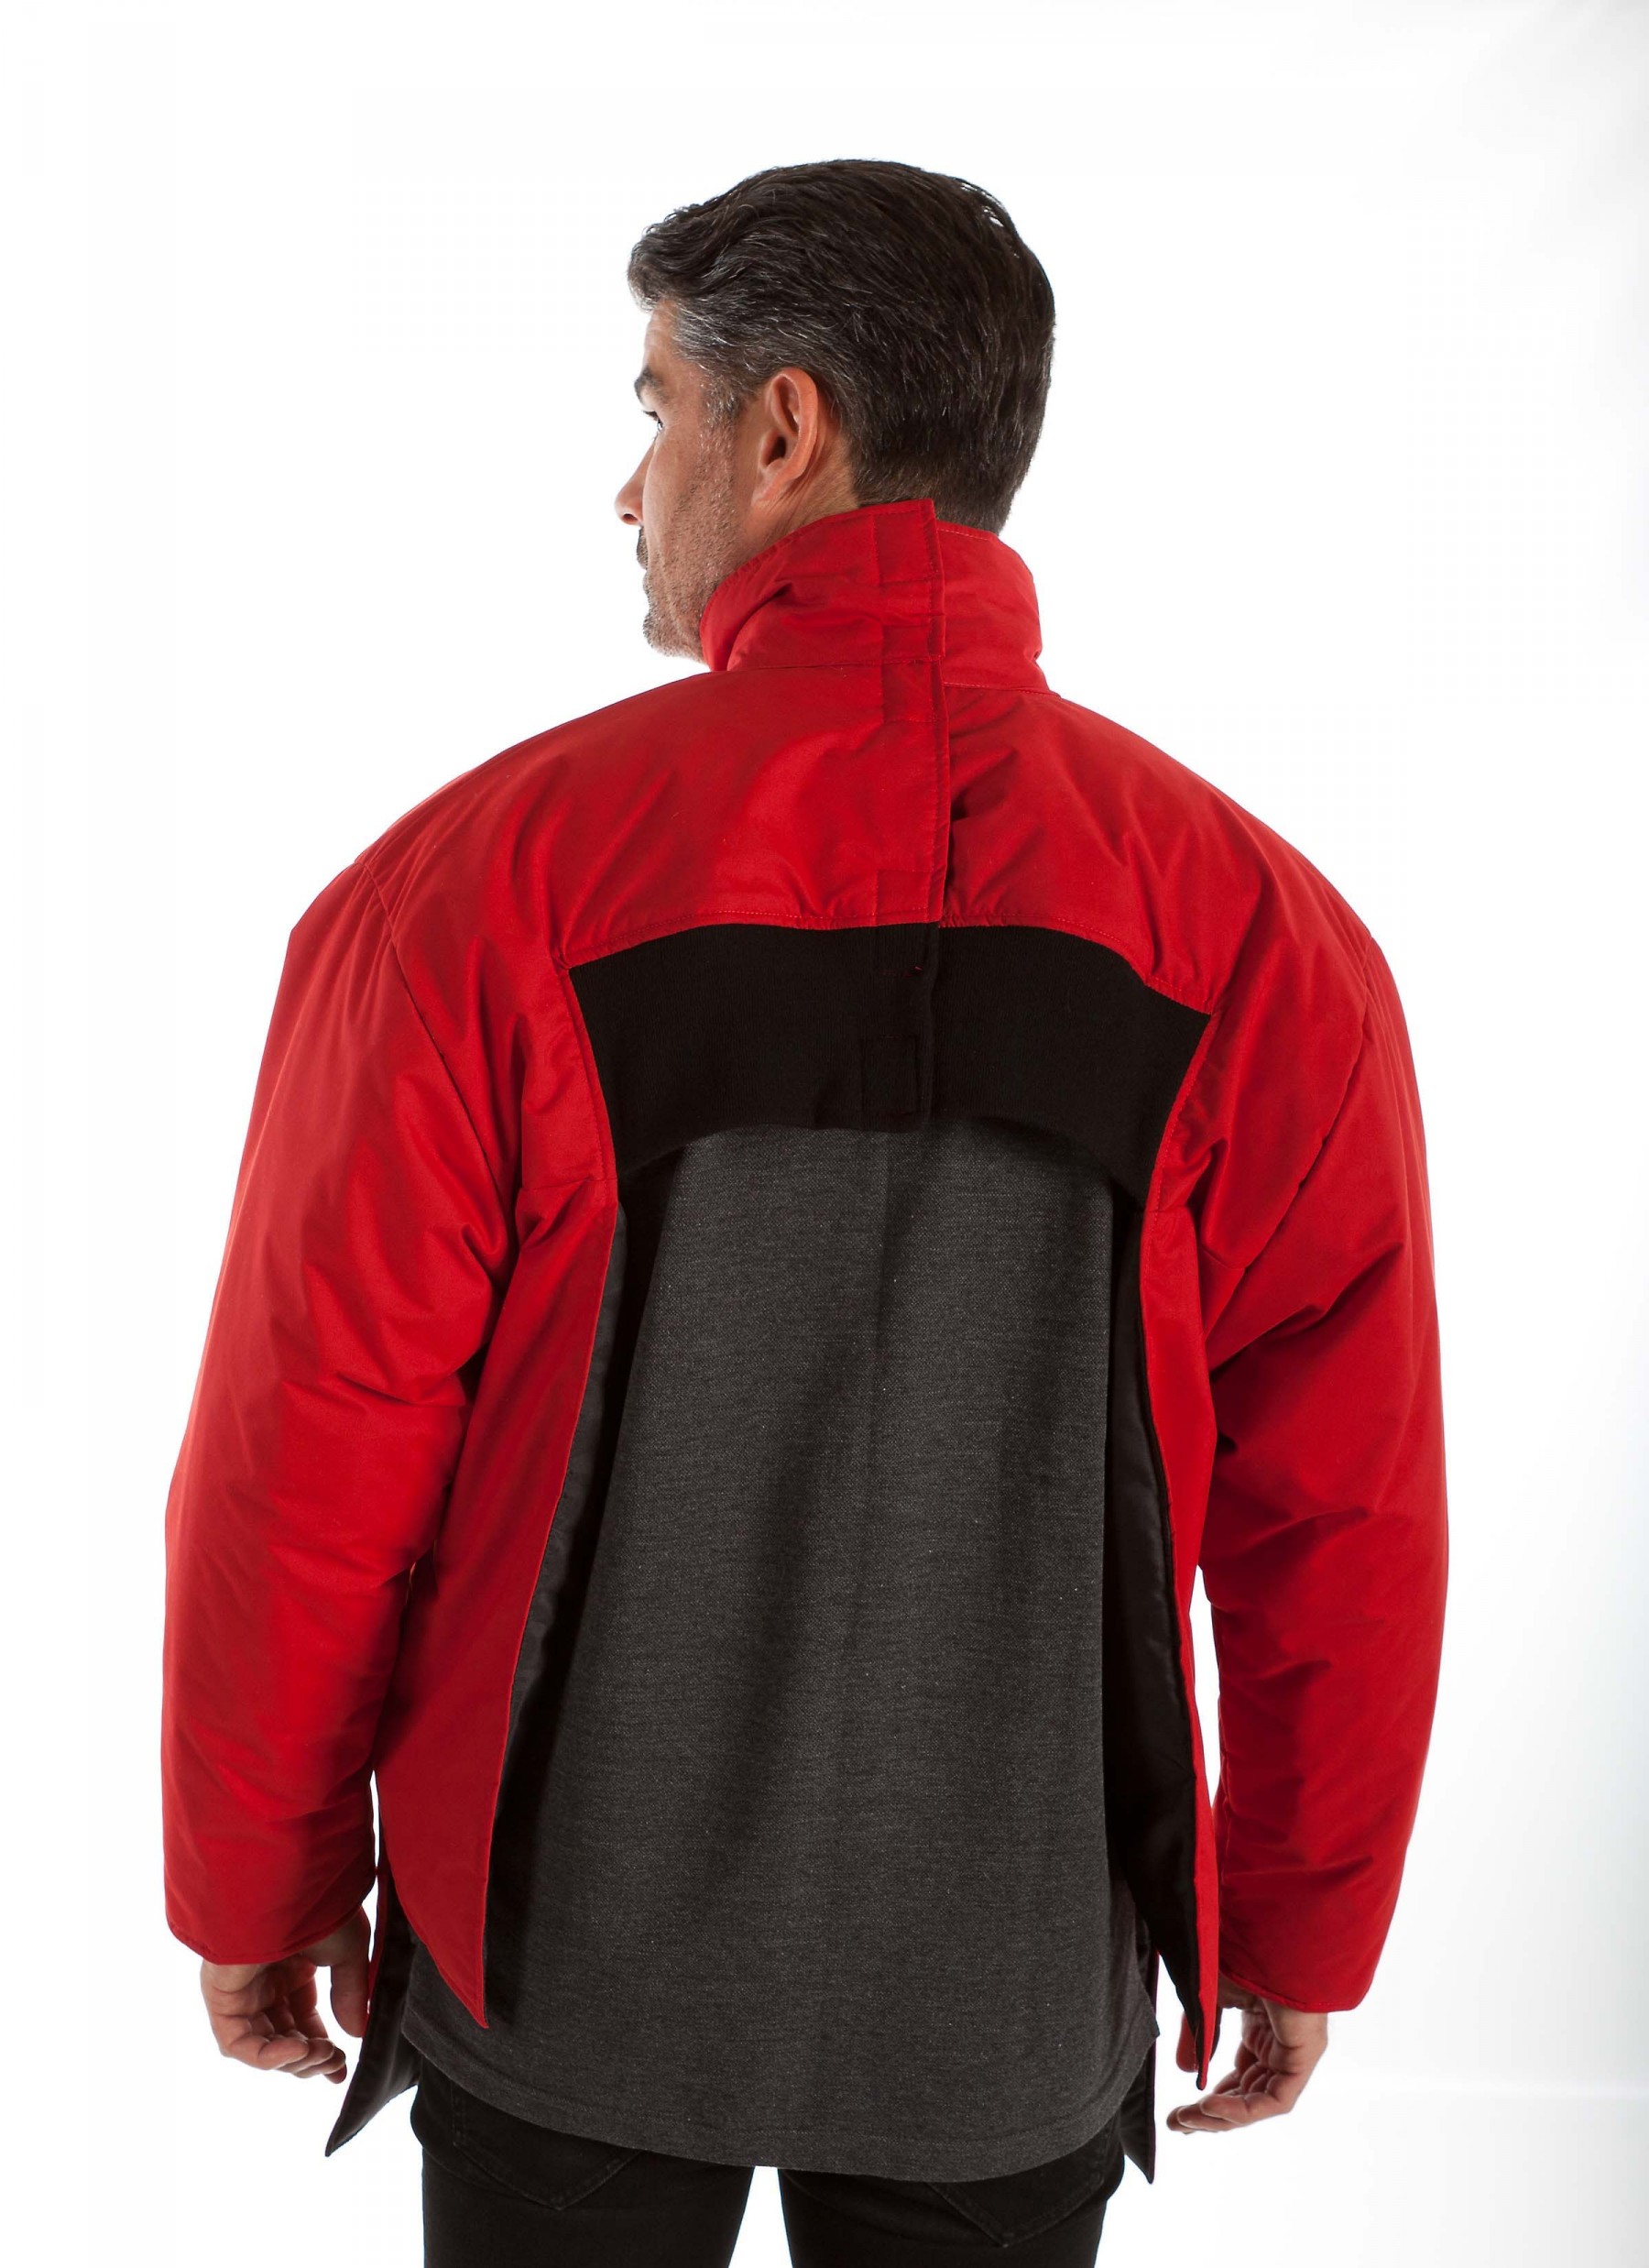 Winter coat for wheelchair users, for Women and Men, Adaptive coat